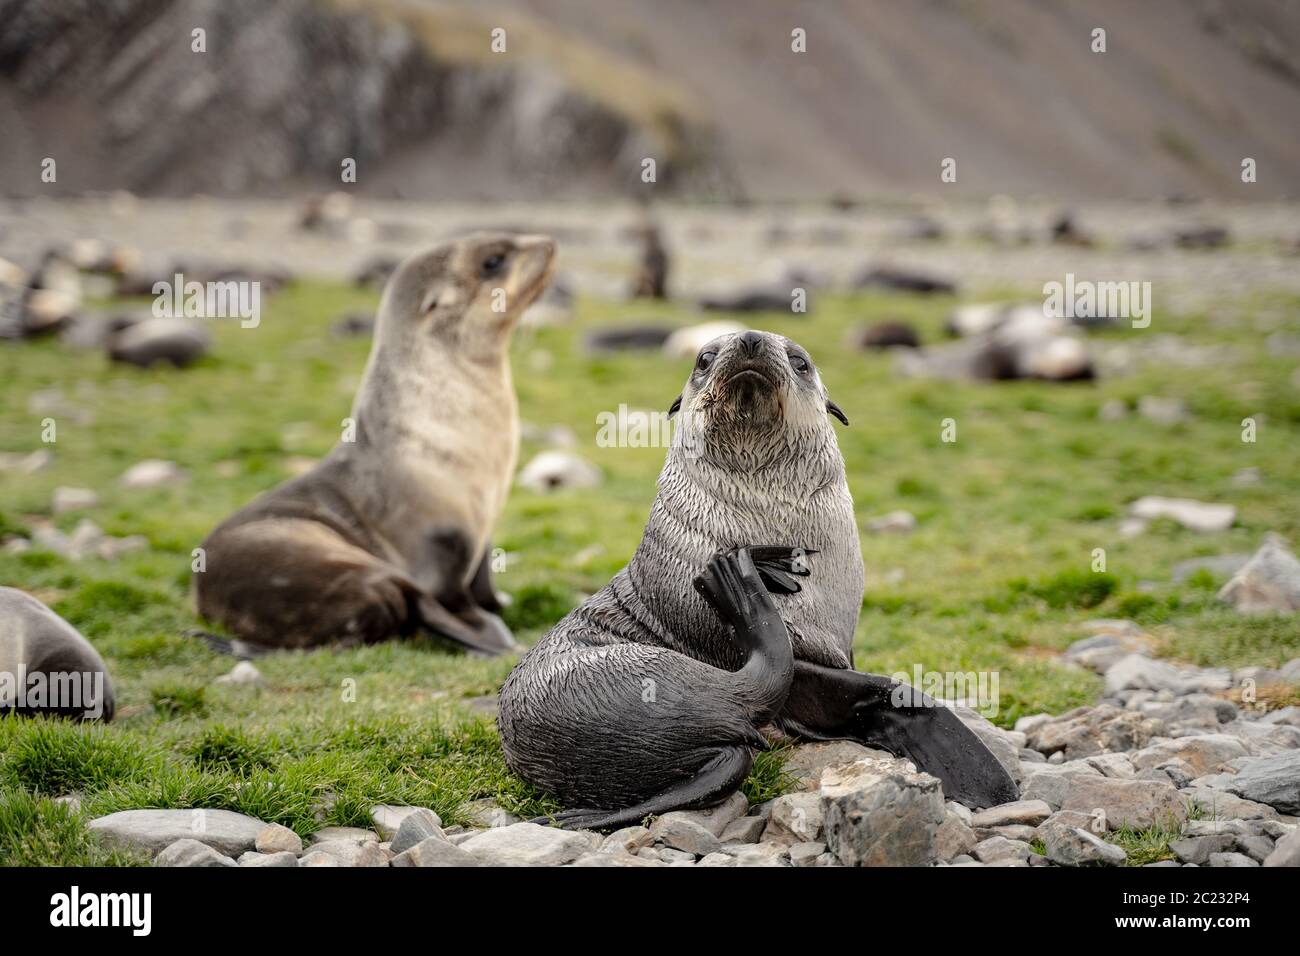 Fur Seal in Fortuna Bay, one of the larger plains on the island of South Georgia and the south sandwich islands Stock Photo